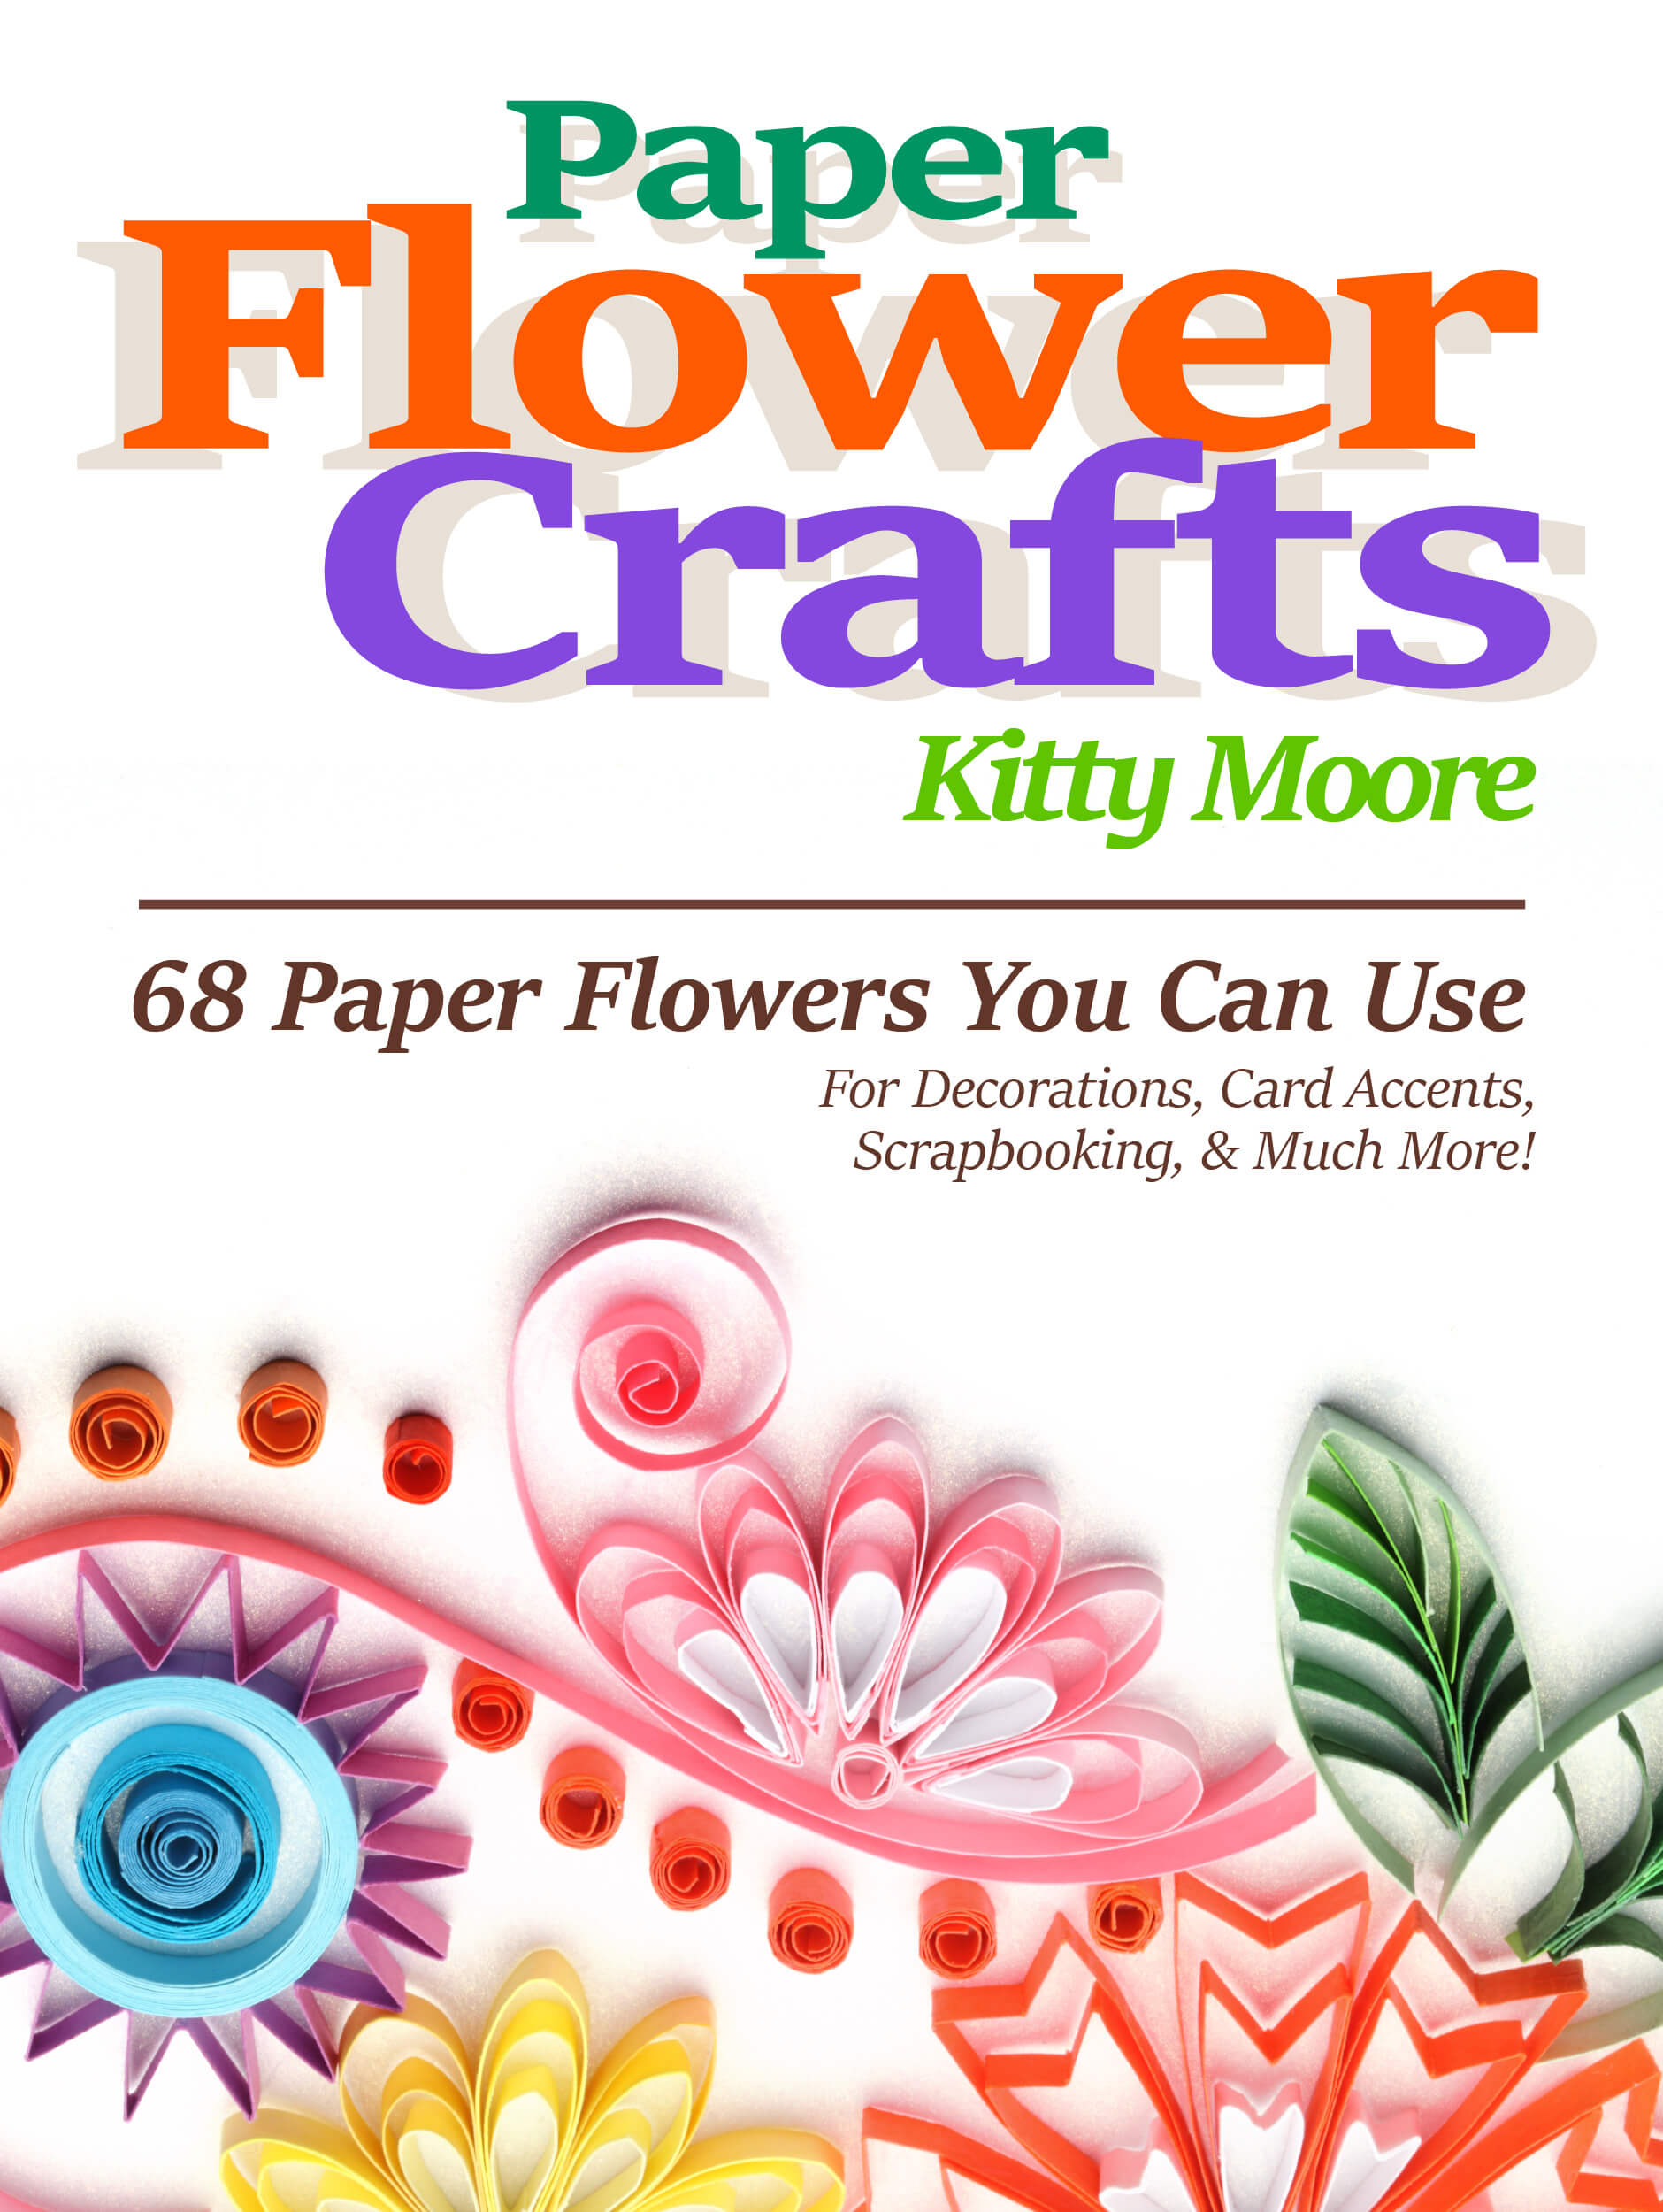 FREE: Paper Flower Crafts (2nd Edition): 68 Paper Flowers You Can Use For Decorations, Card Accents, Scrapbooking, & Much More! by Kitty Moore